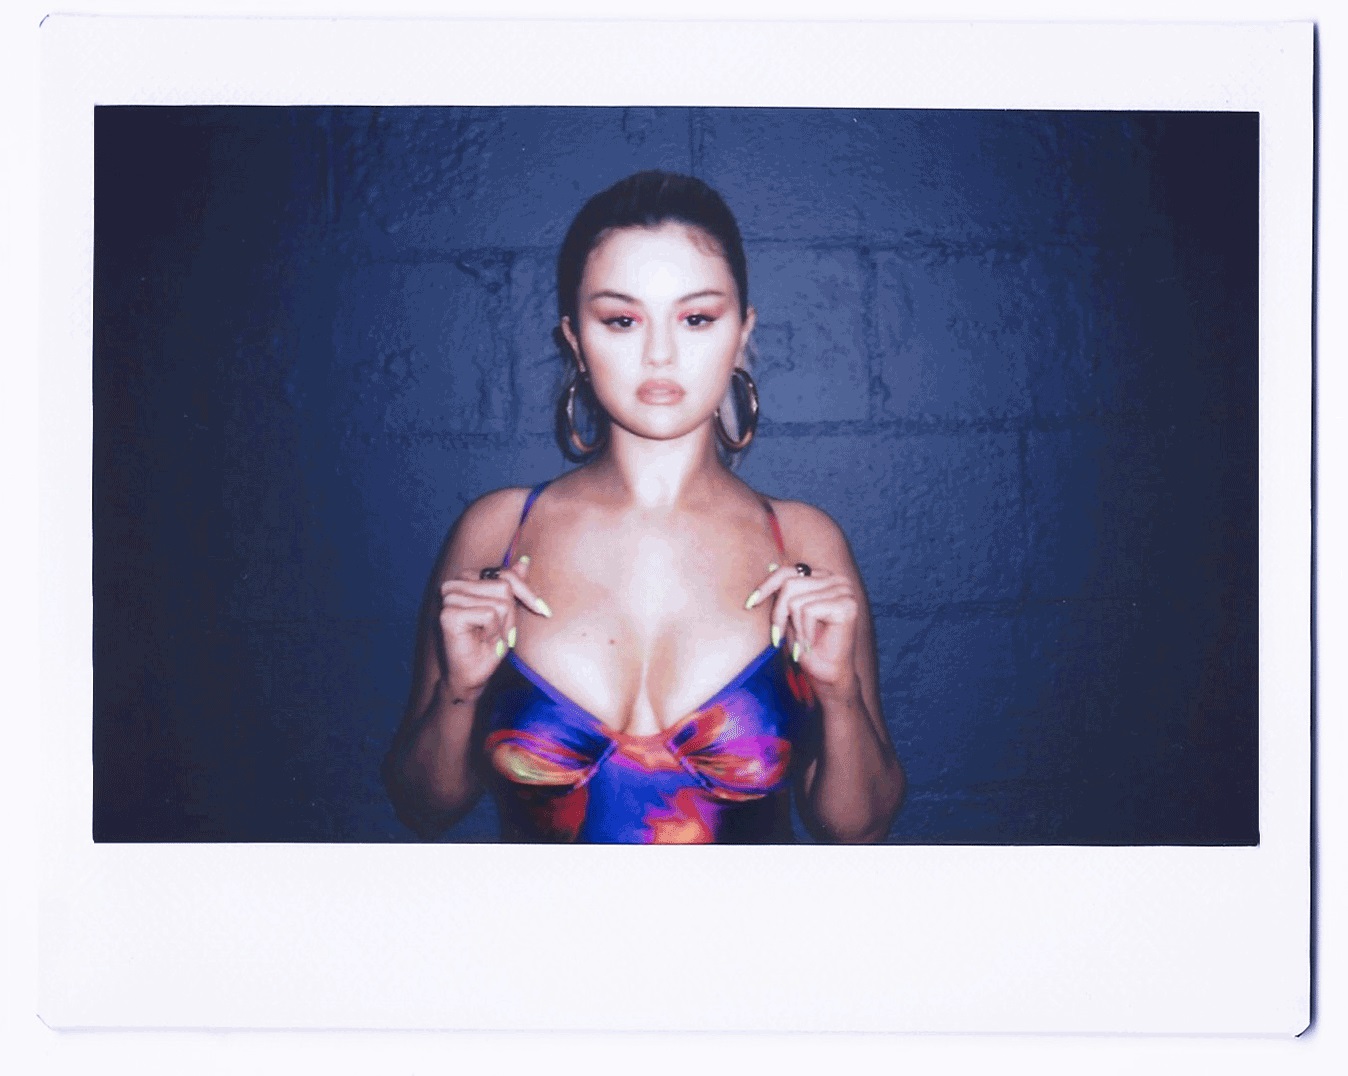 2 July check out the promo gif with outtakes from Selena's photoshoot ...